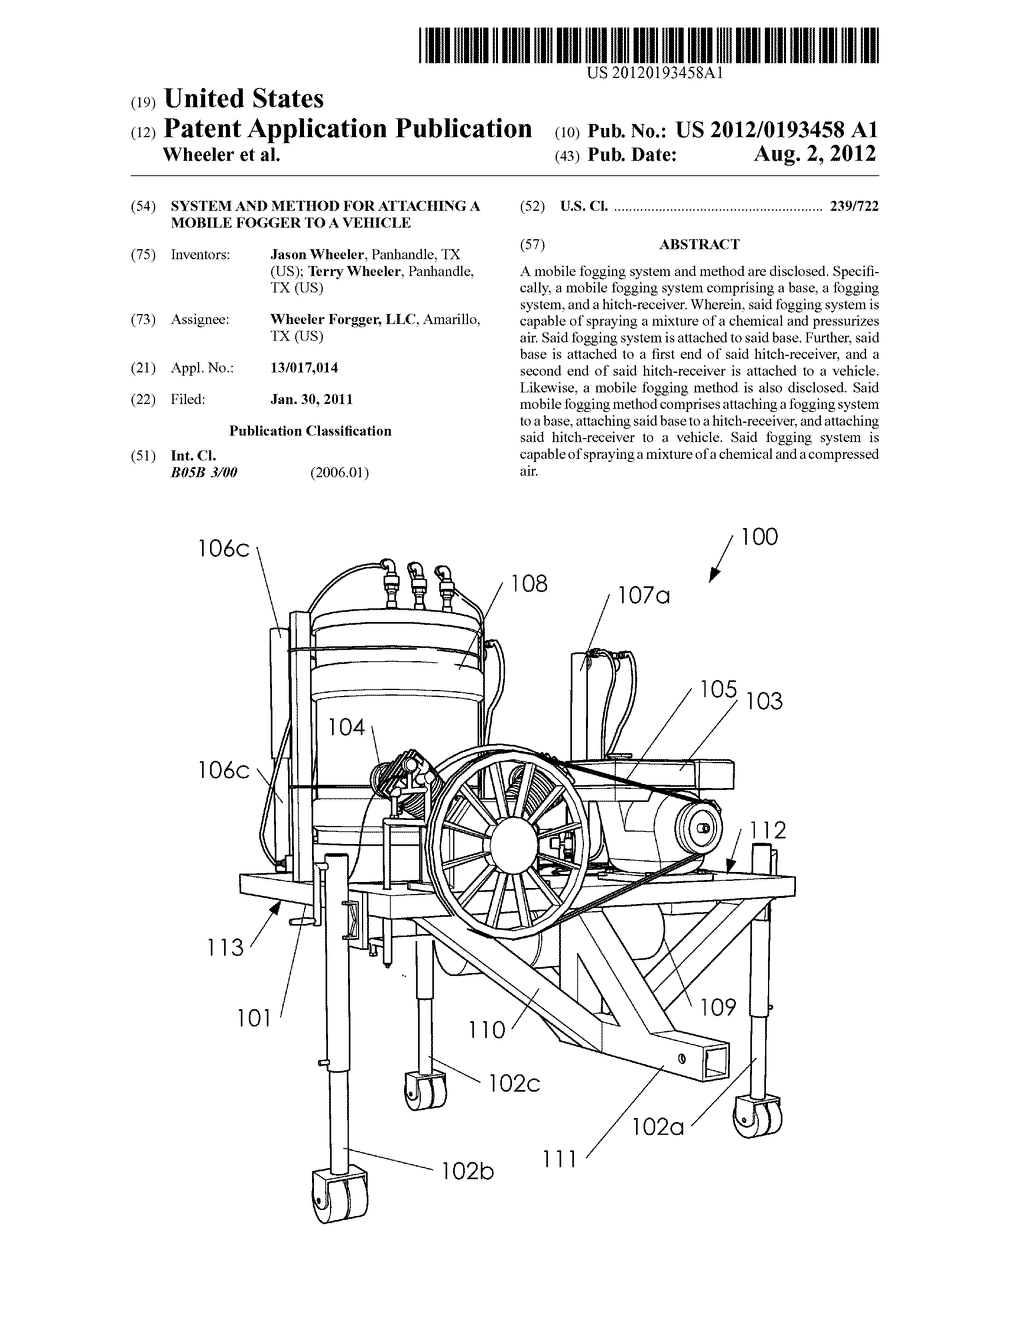 System and Method for Attaching a Mobile Fogger to a Vehicle - diagram, schematic, and image 01